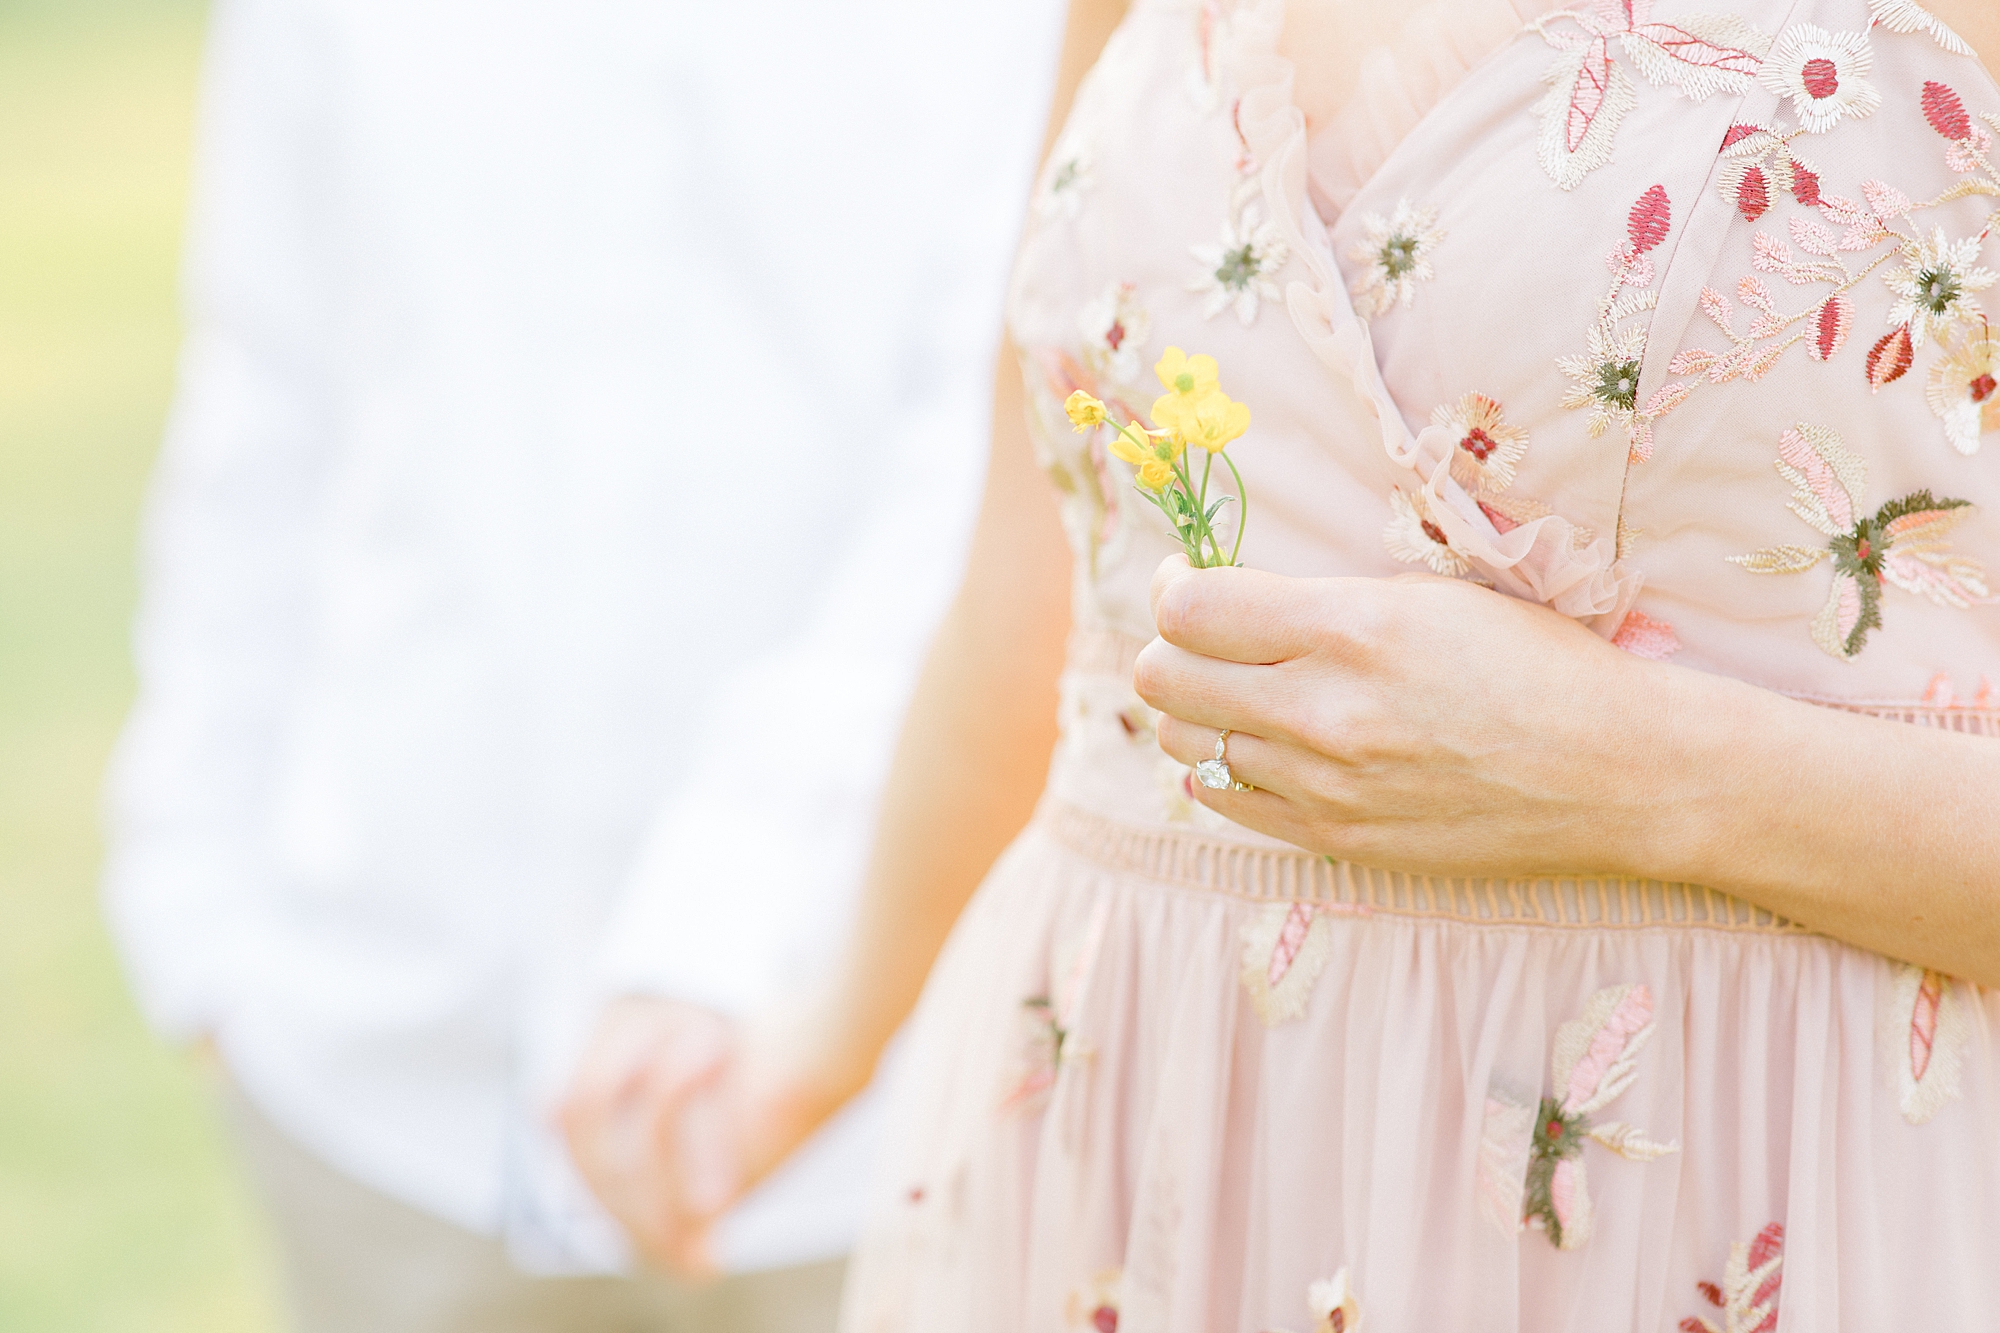 woman in pink floral dress holds hands with man and yellow flowers in other hand